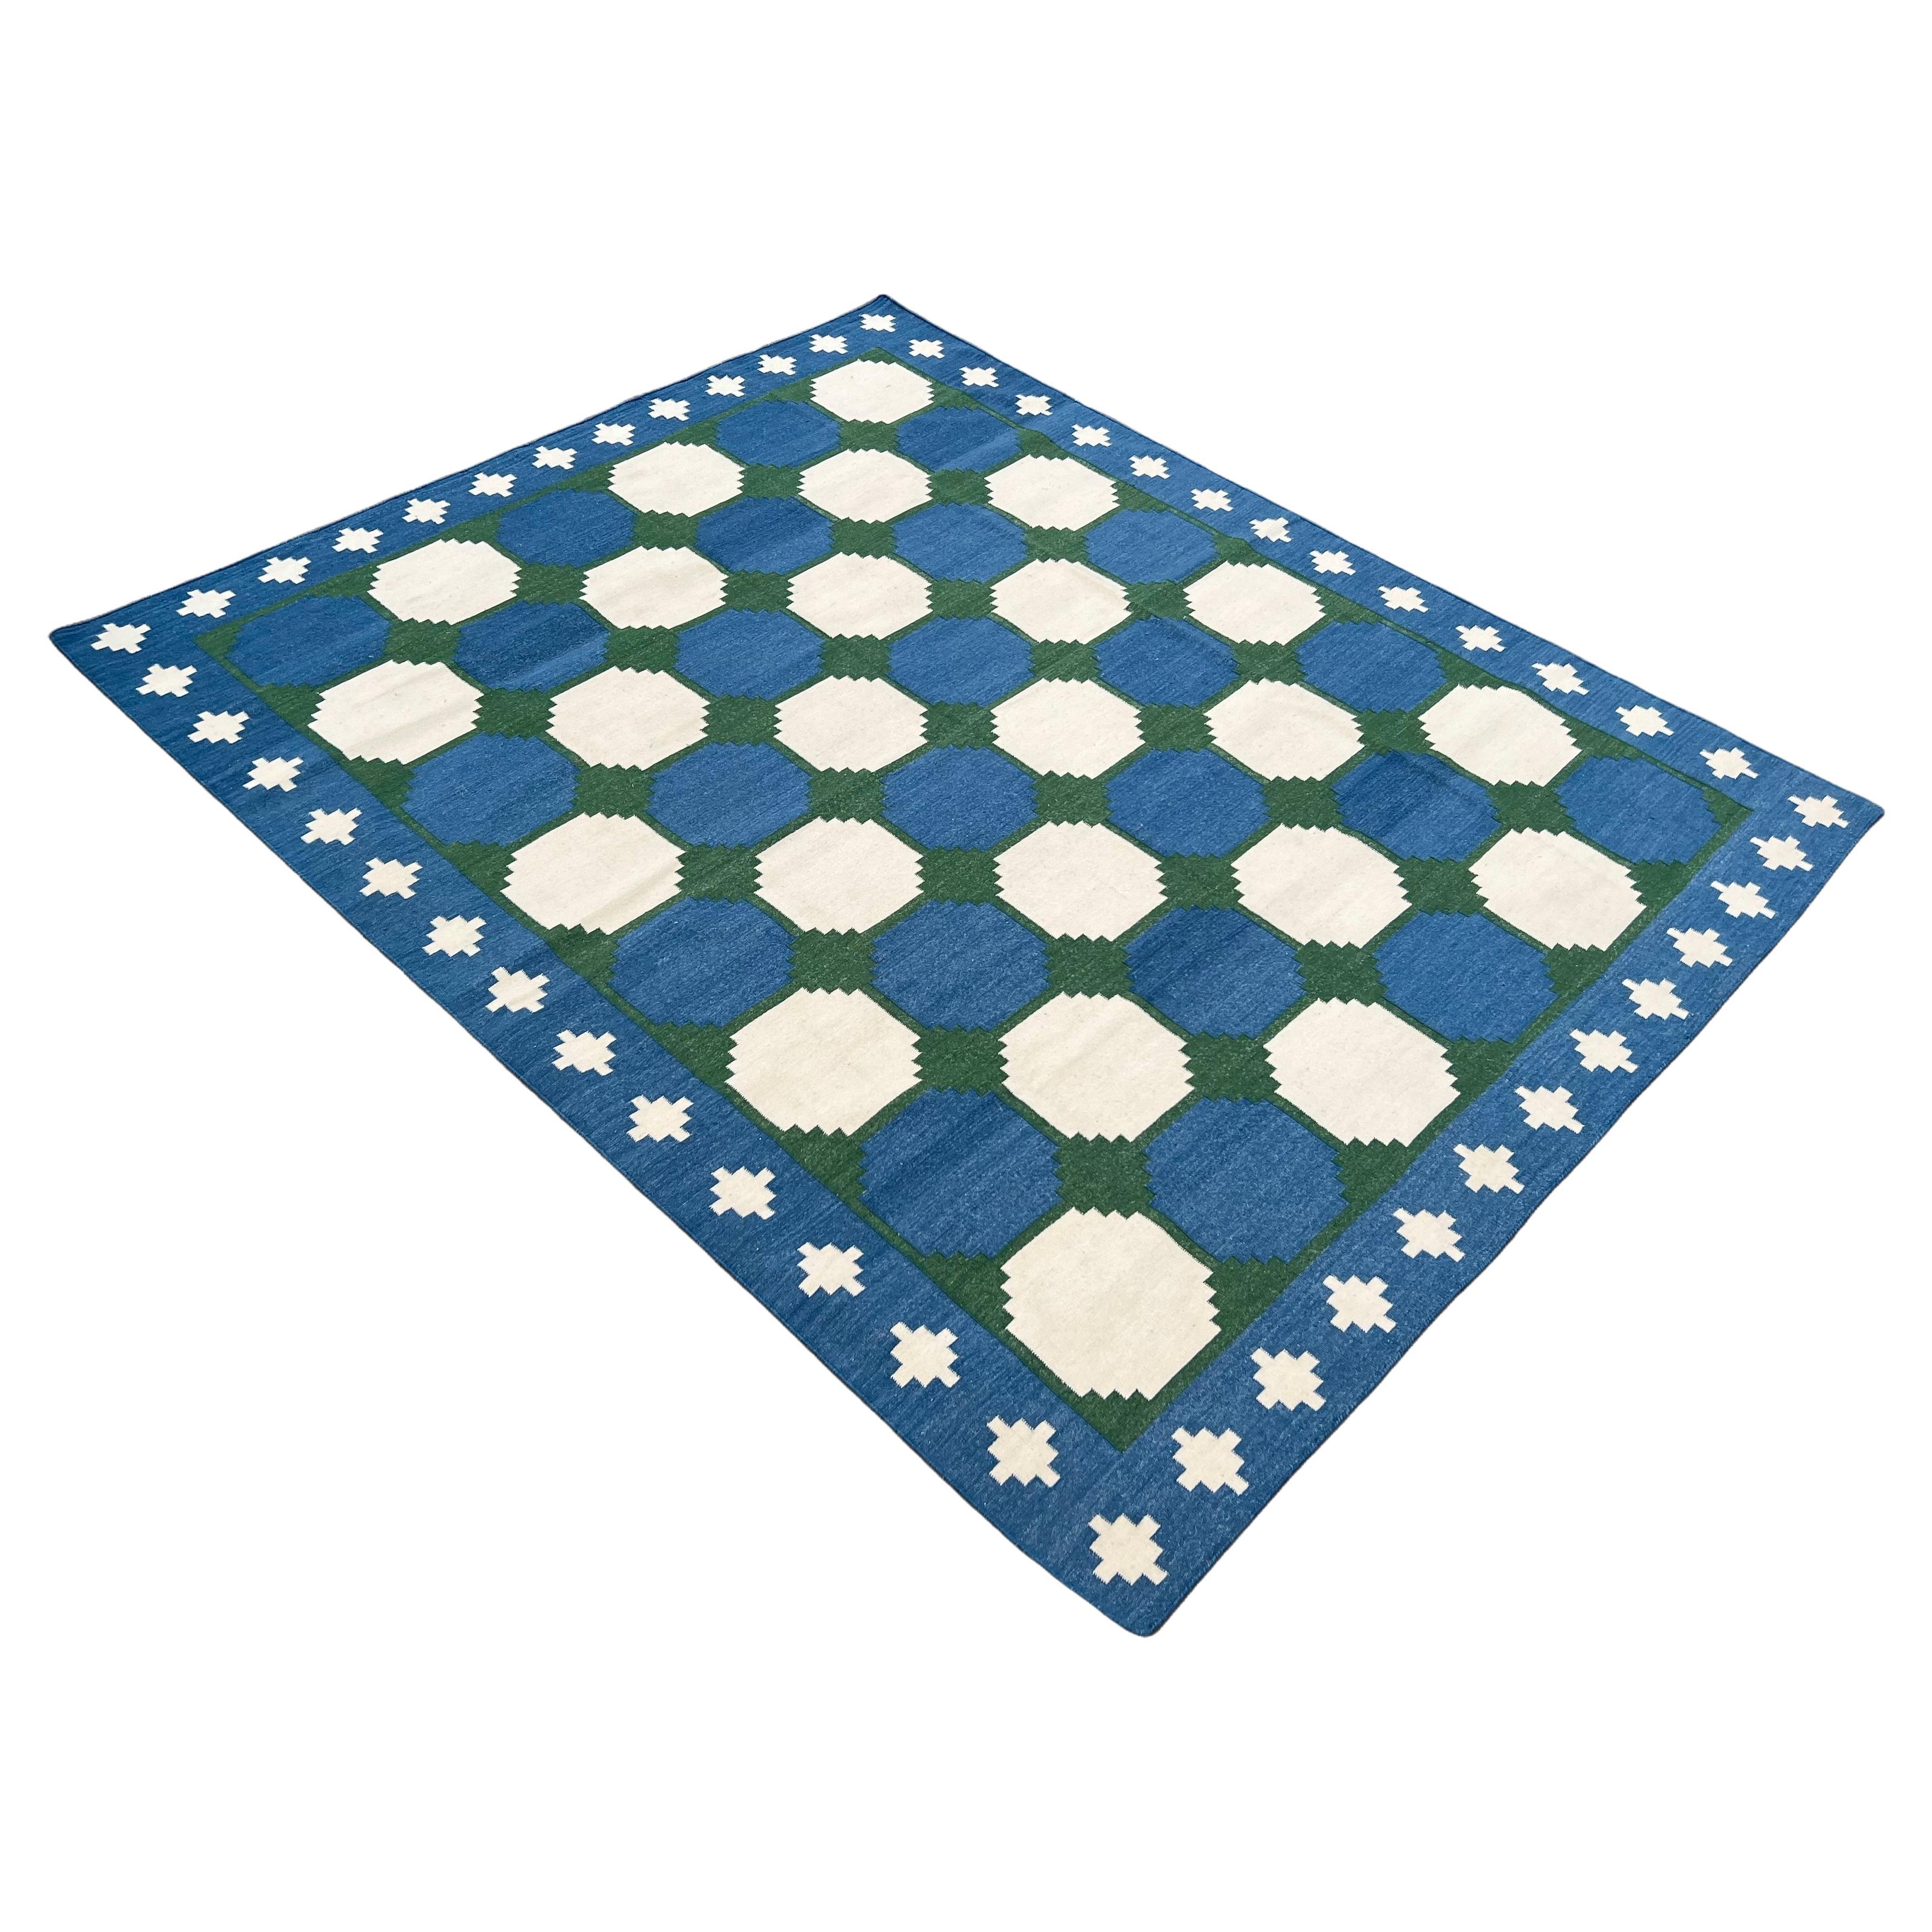 Handmade Woolen Area Flat Weave Rug, 8x10 Blue And Green Tile Patterned Dhurrie